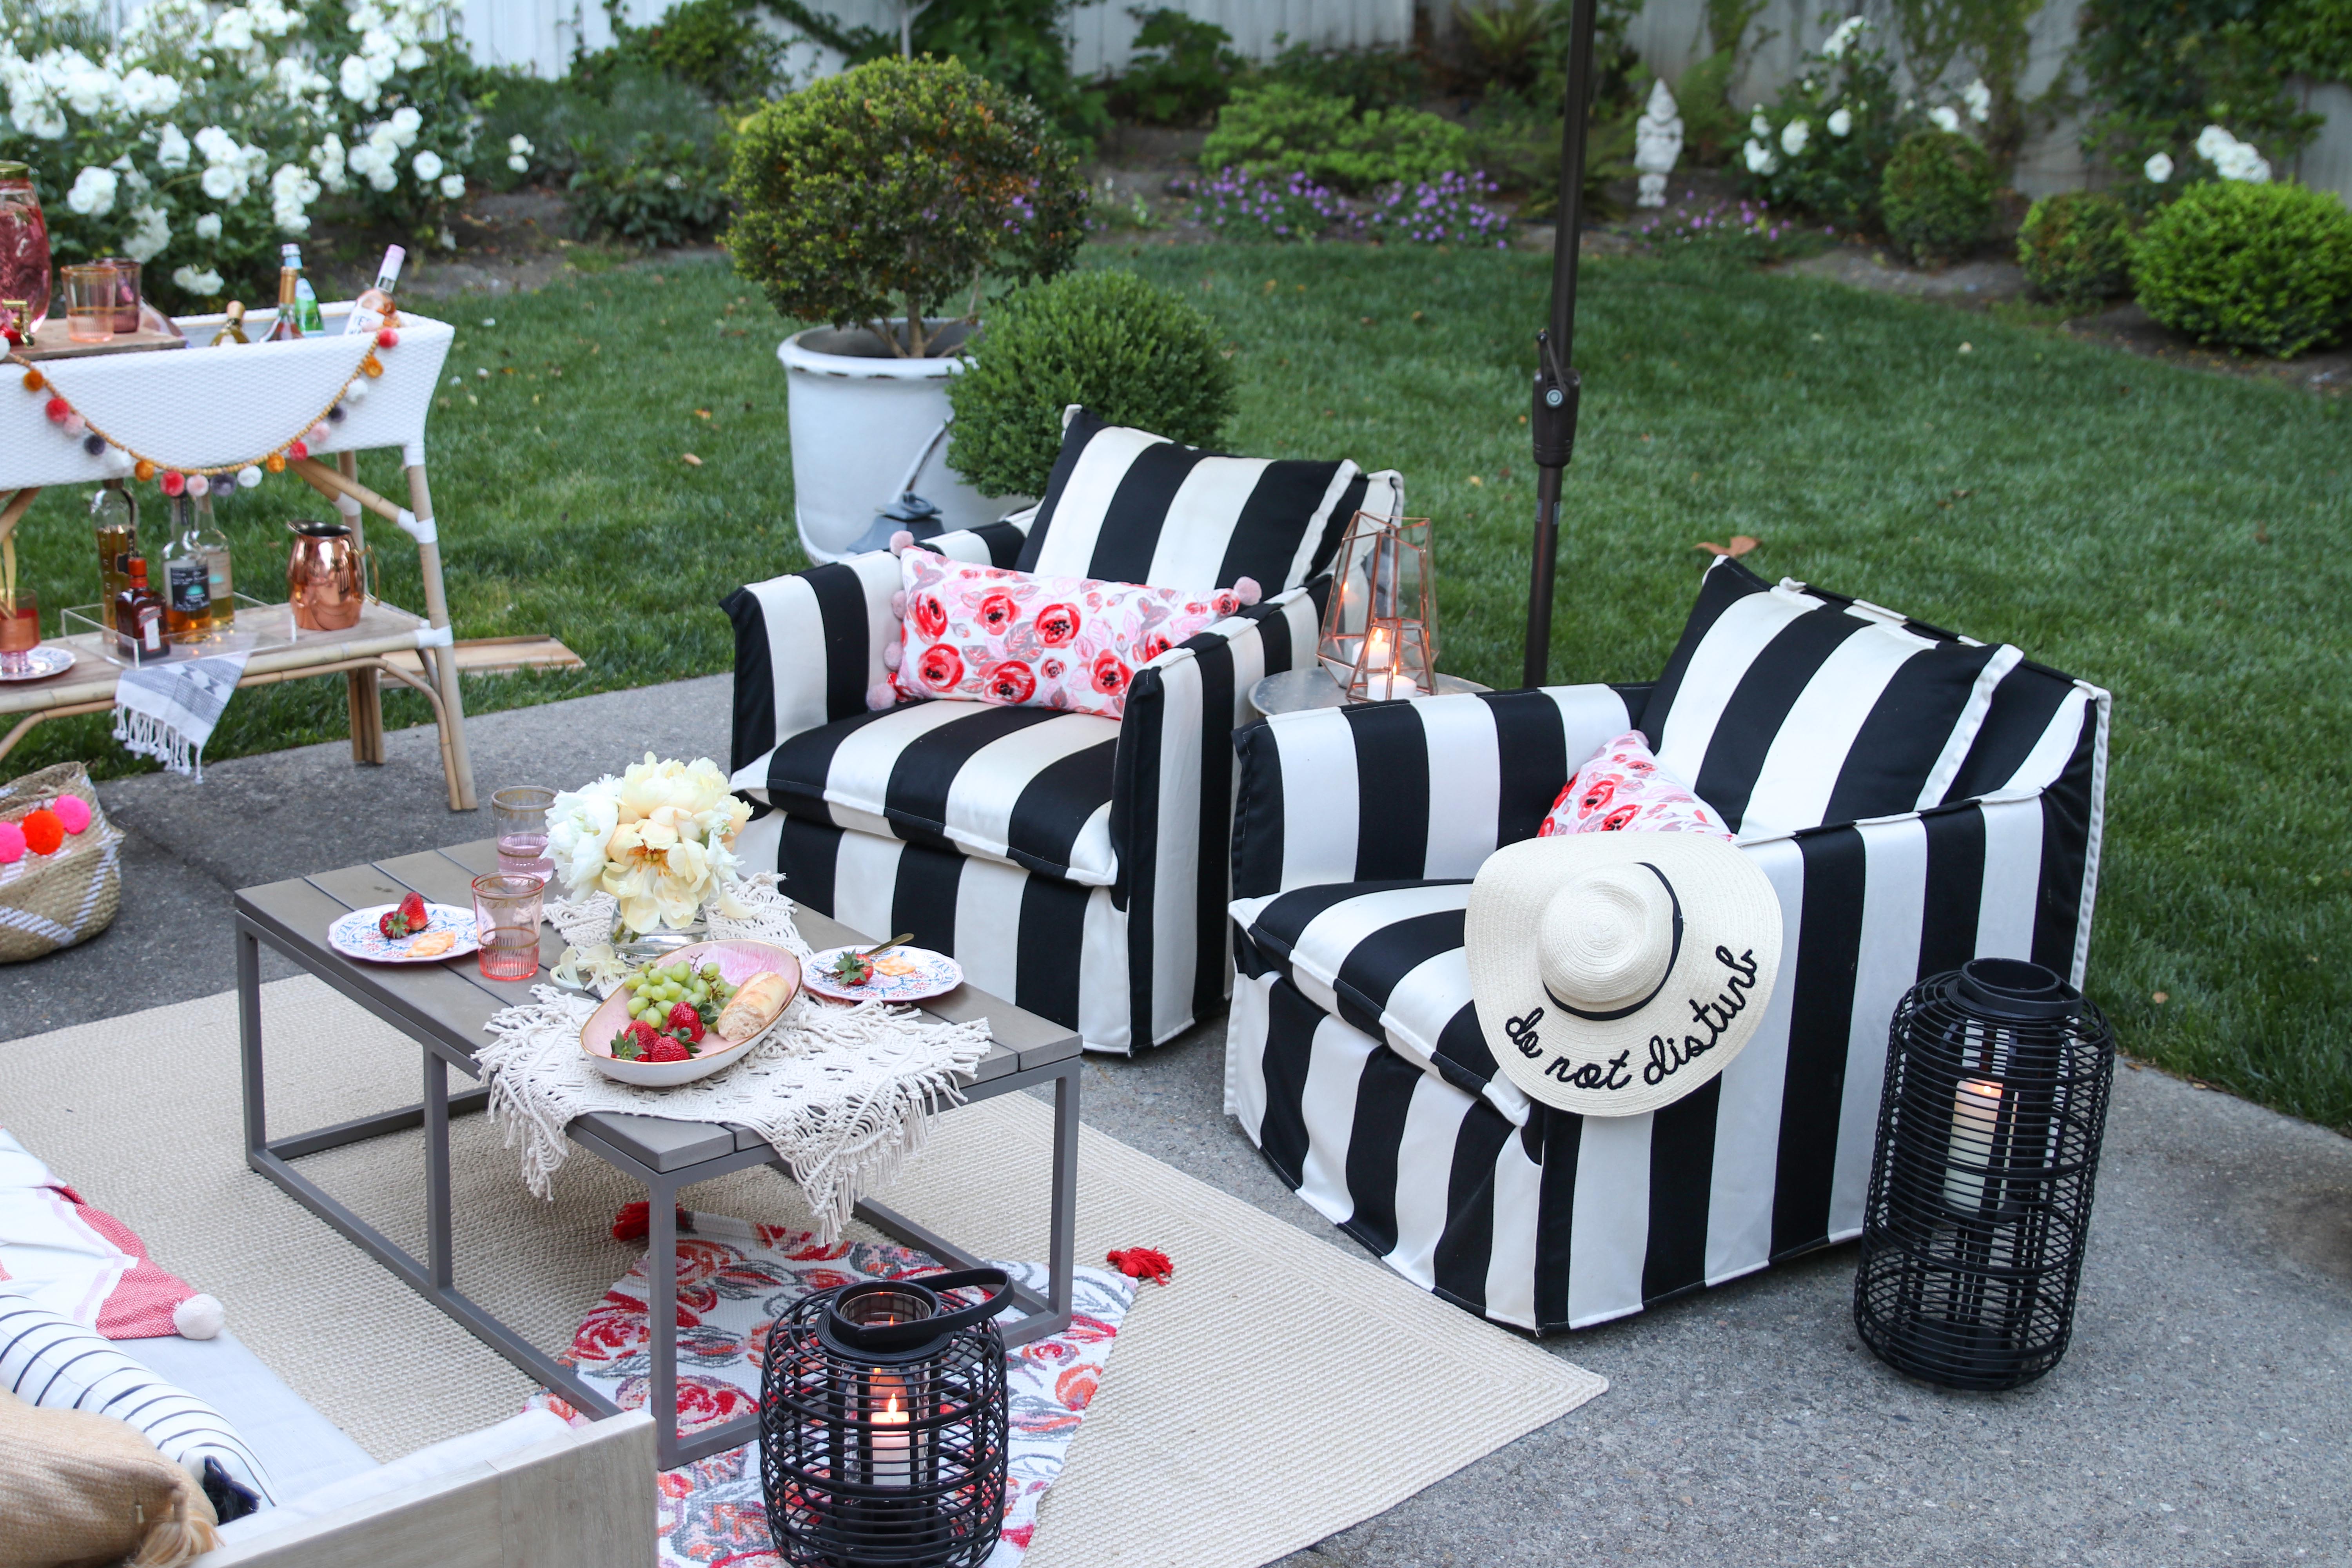 10 outdoor decorating ideas sure to inspire you